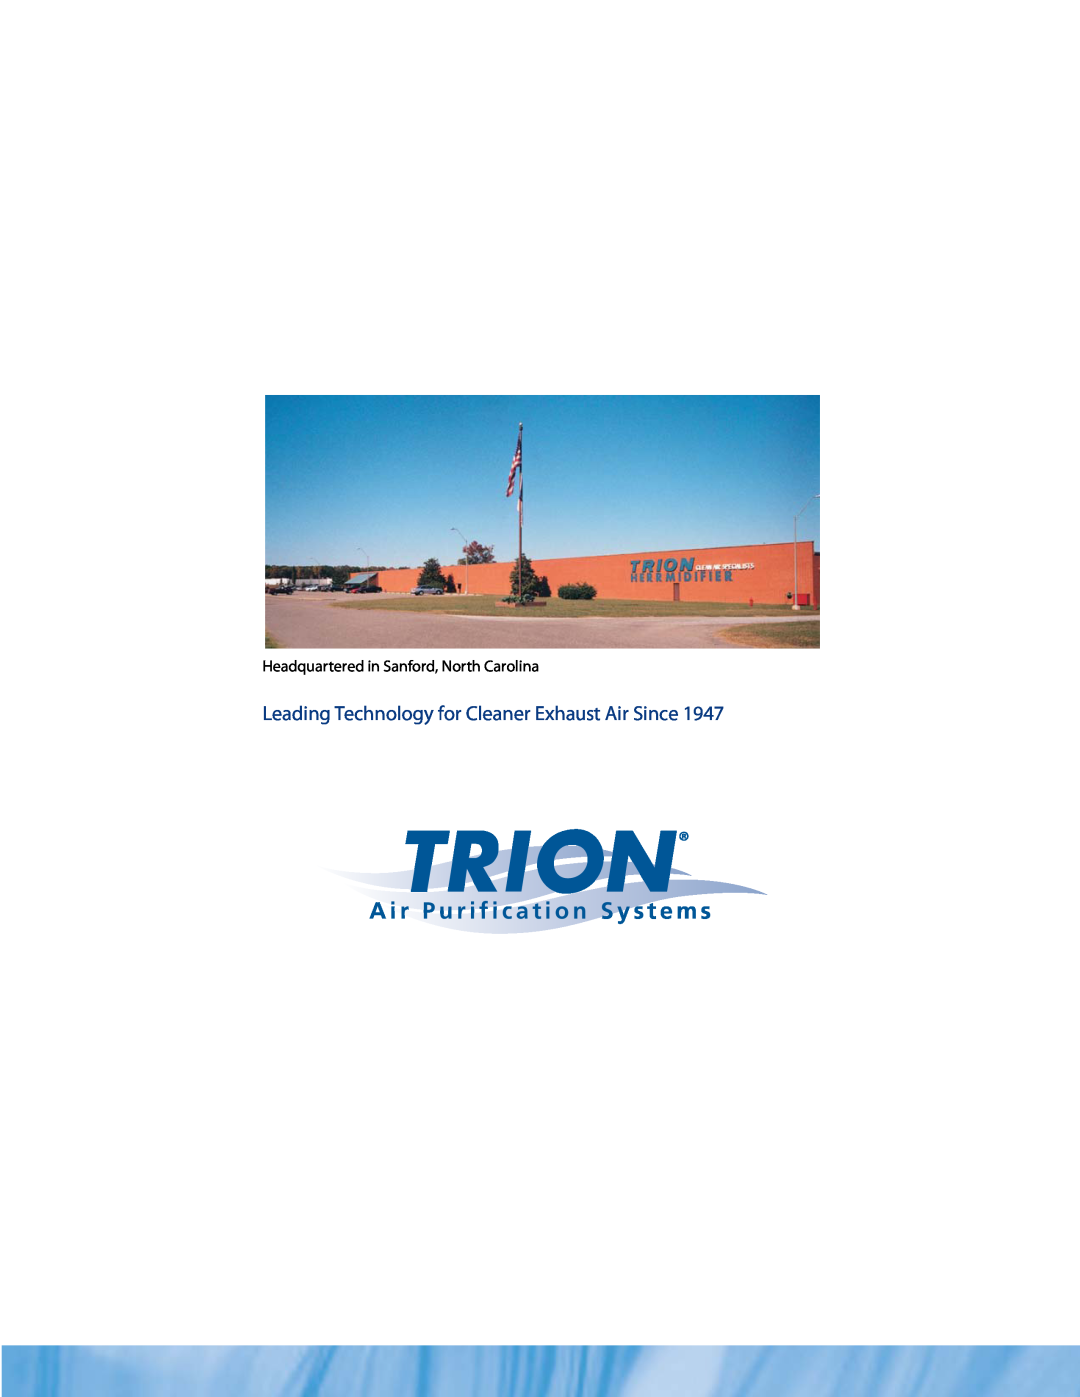 Trion Air Boss ATS manual Leading Technology for Cleaner Exhaust Air Since, A i r P u r i f i c a t i o n S y s t e m s 